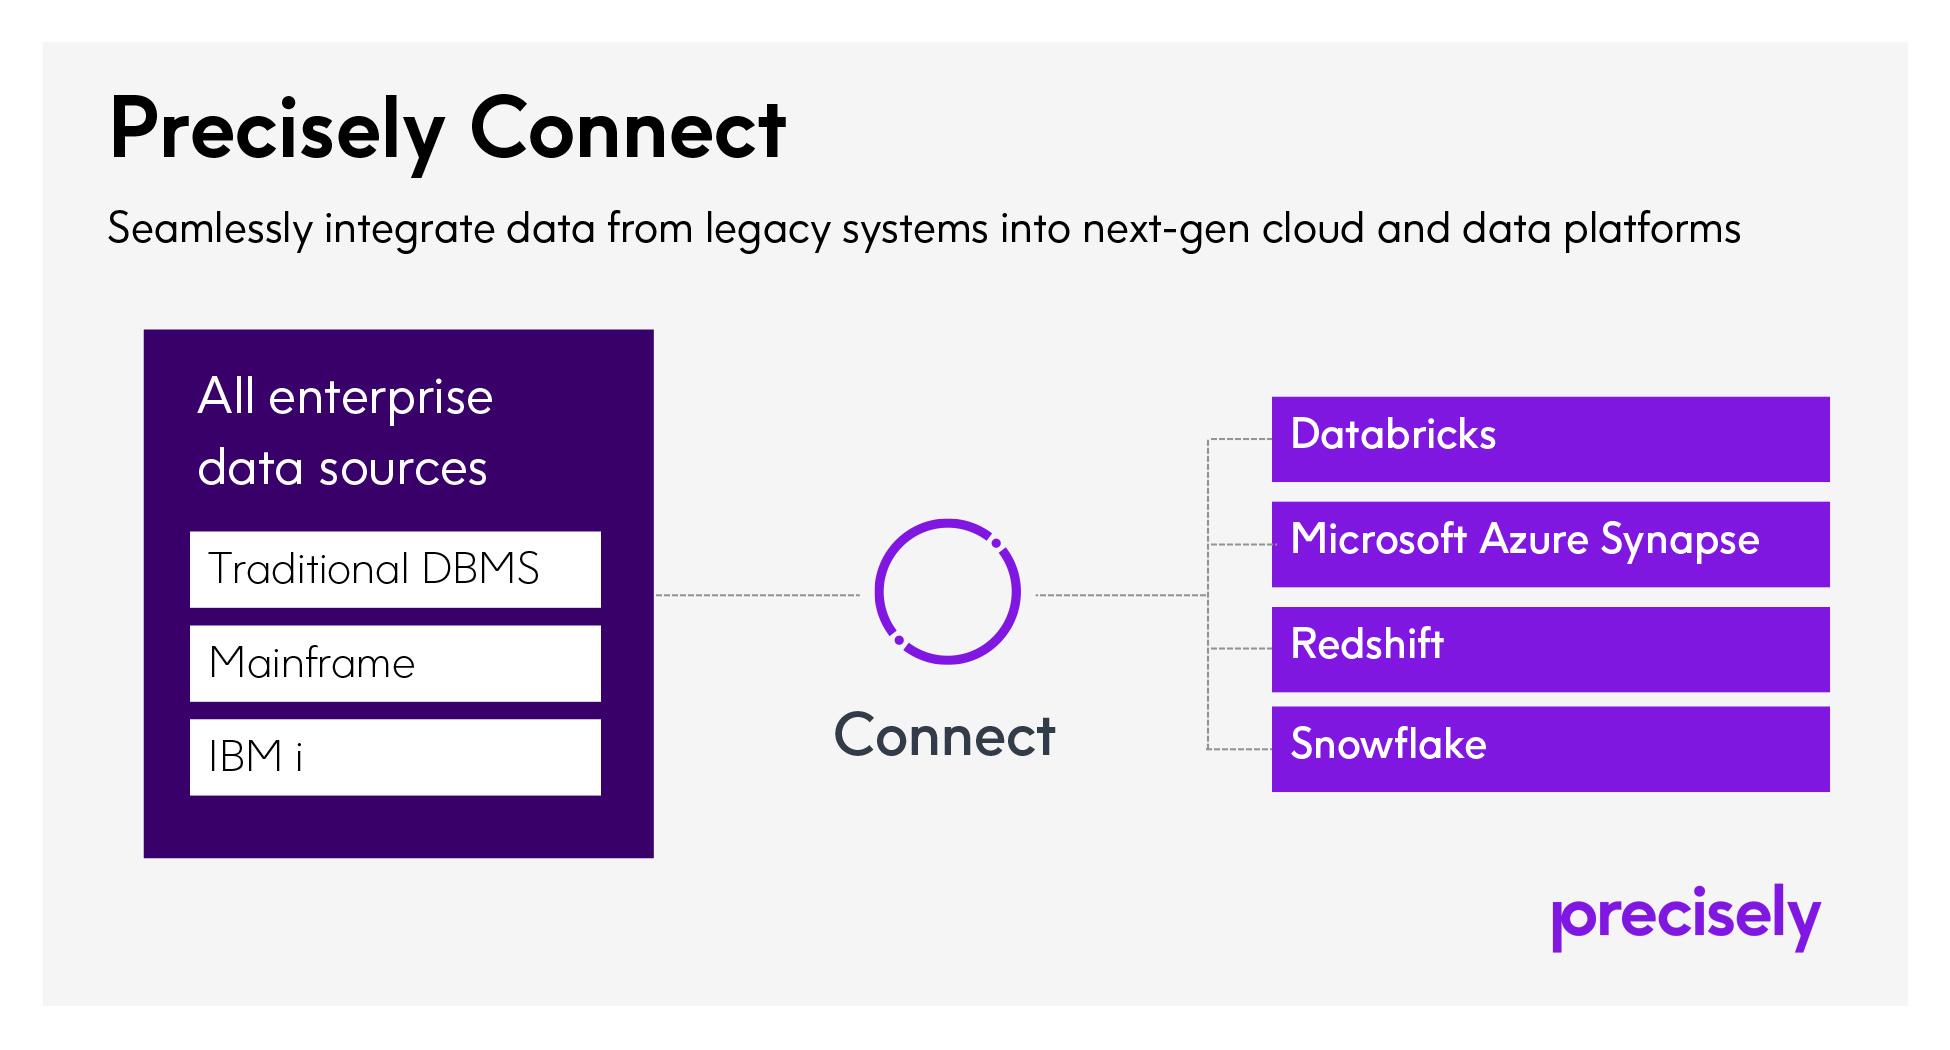 Precisely Delivers Trusted Data to Databricks, Microsoft Azure Synapse and Snowflake